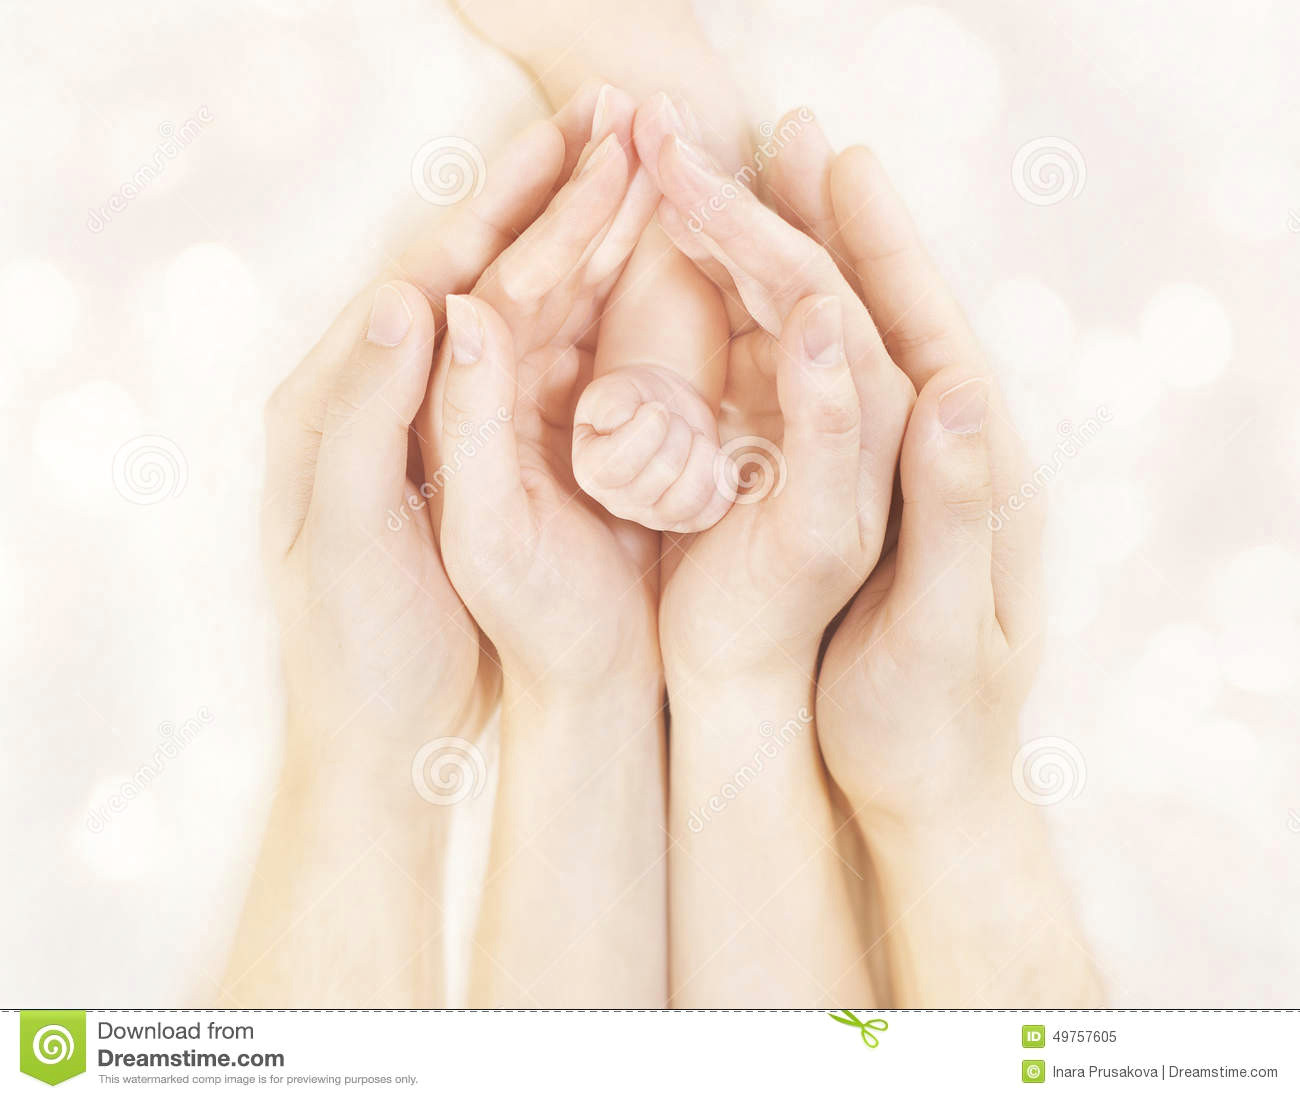 Drawings Of Hands Holding Baby Feet Family Hands and Baby New Born Arm Mother Father Children Body